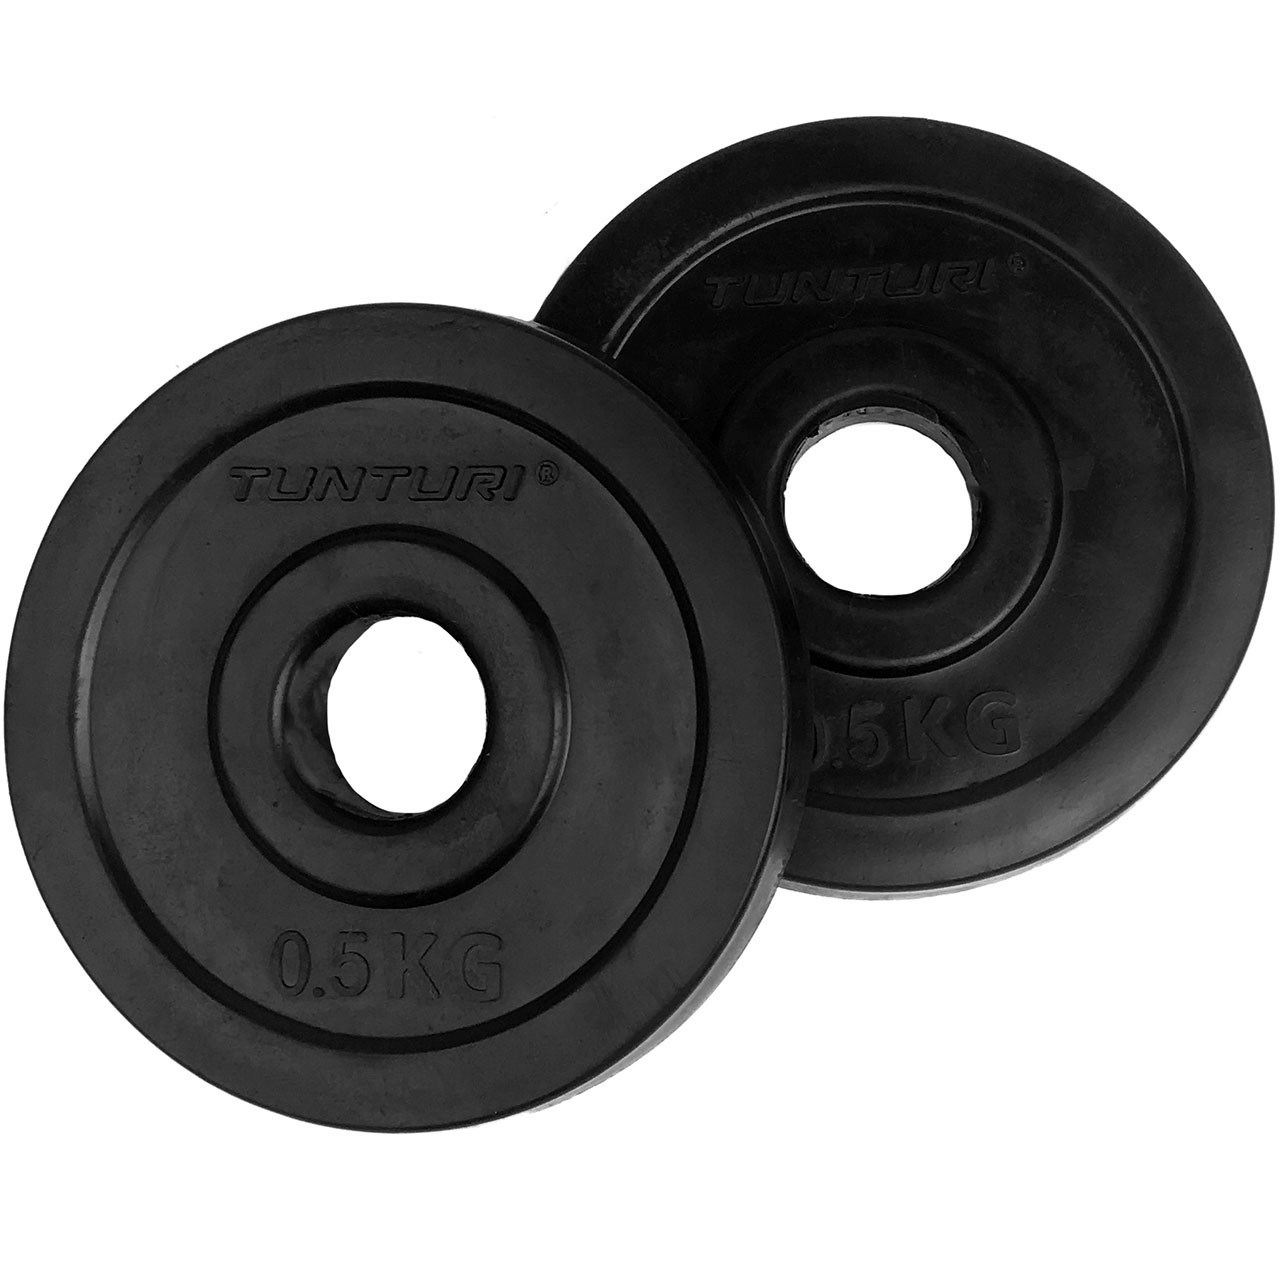 Rubber Coated 0.5 kg Tunturi Weight Disc Pair 30 mm